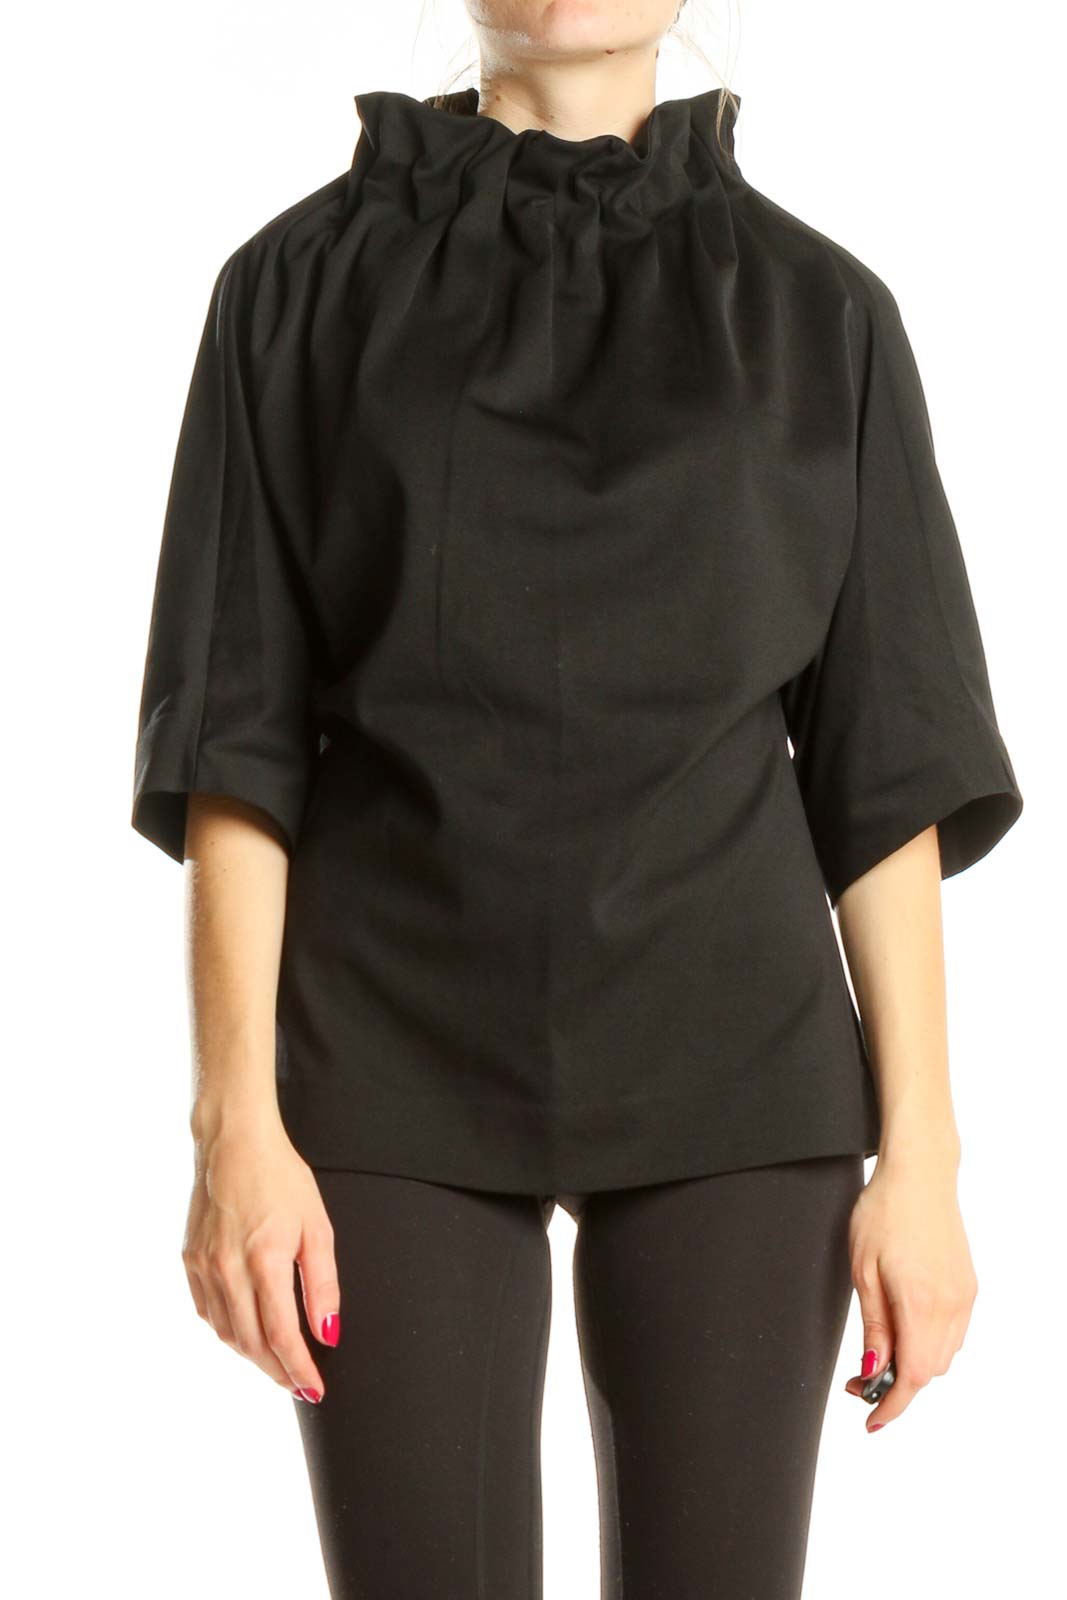 Black Structured Chic Top With Scrunch Neck Detail Front